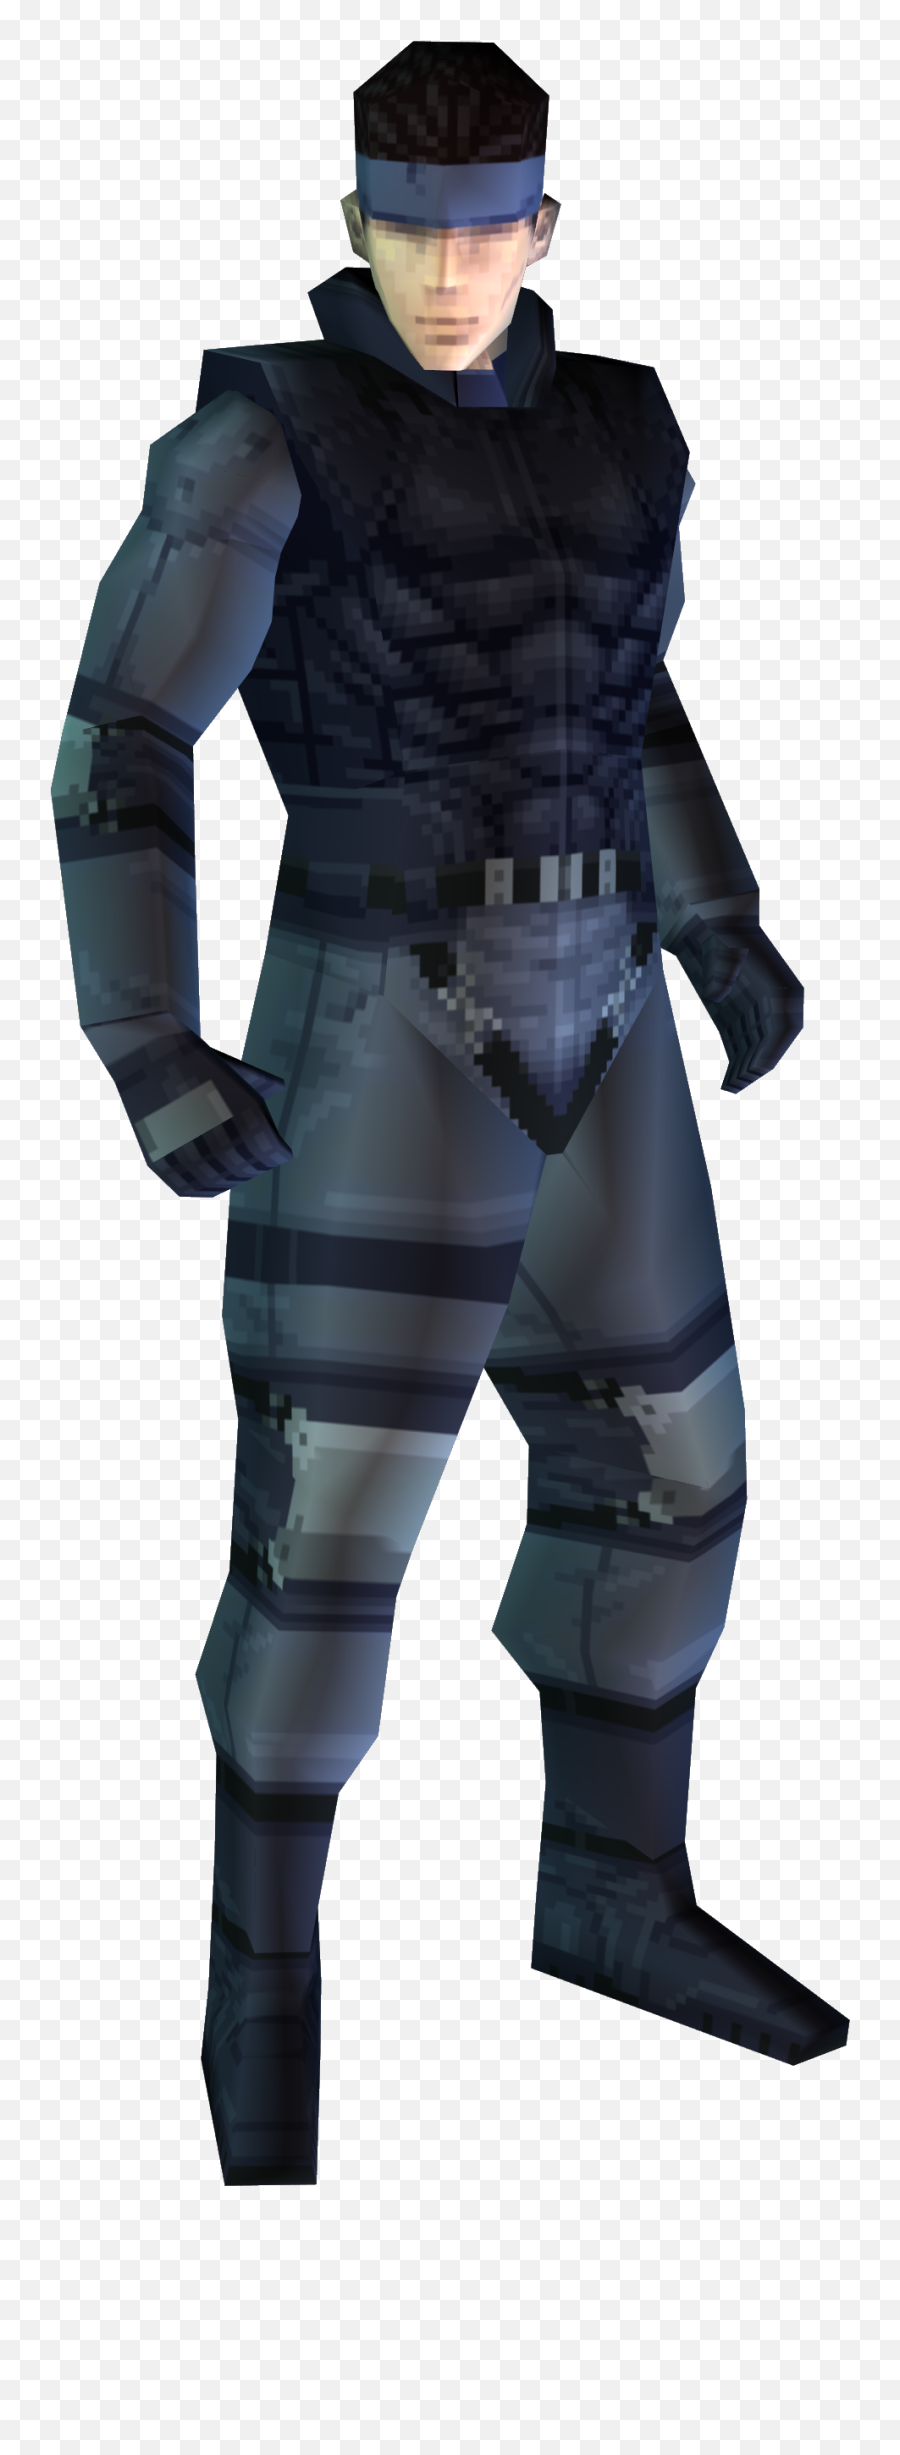 Metal Gear Solid Png Transparent Hd - Mgs1 Solid Snake Emoji,Ladder Snake Emoticon Metal Gear Solid